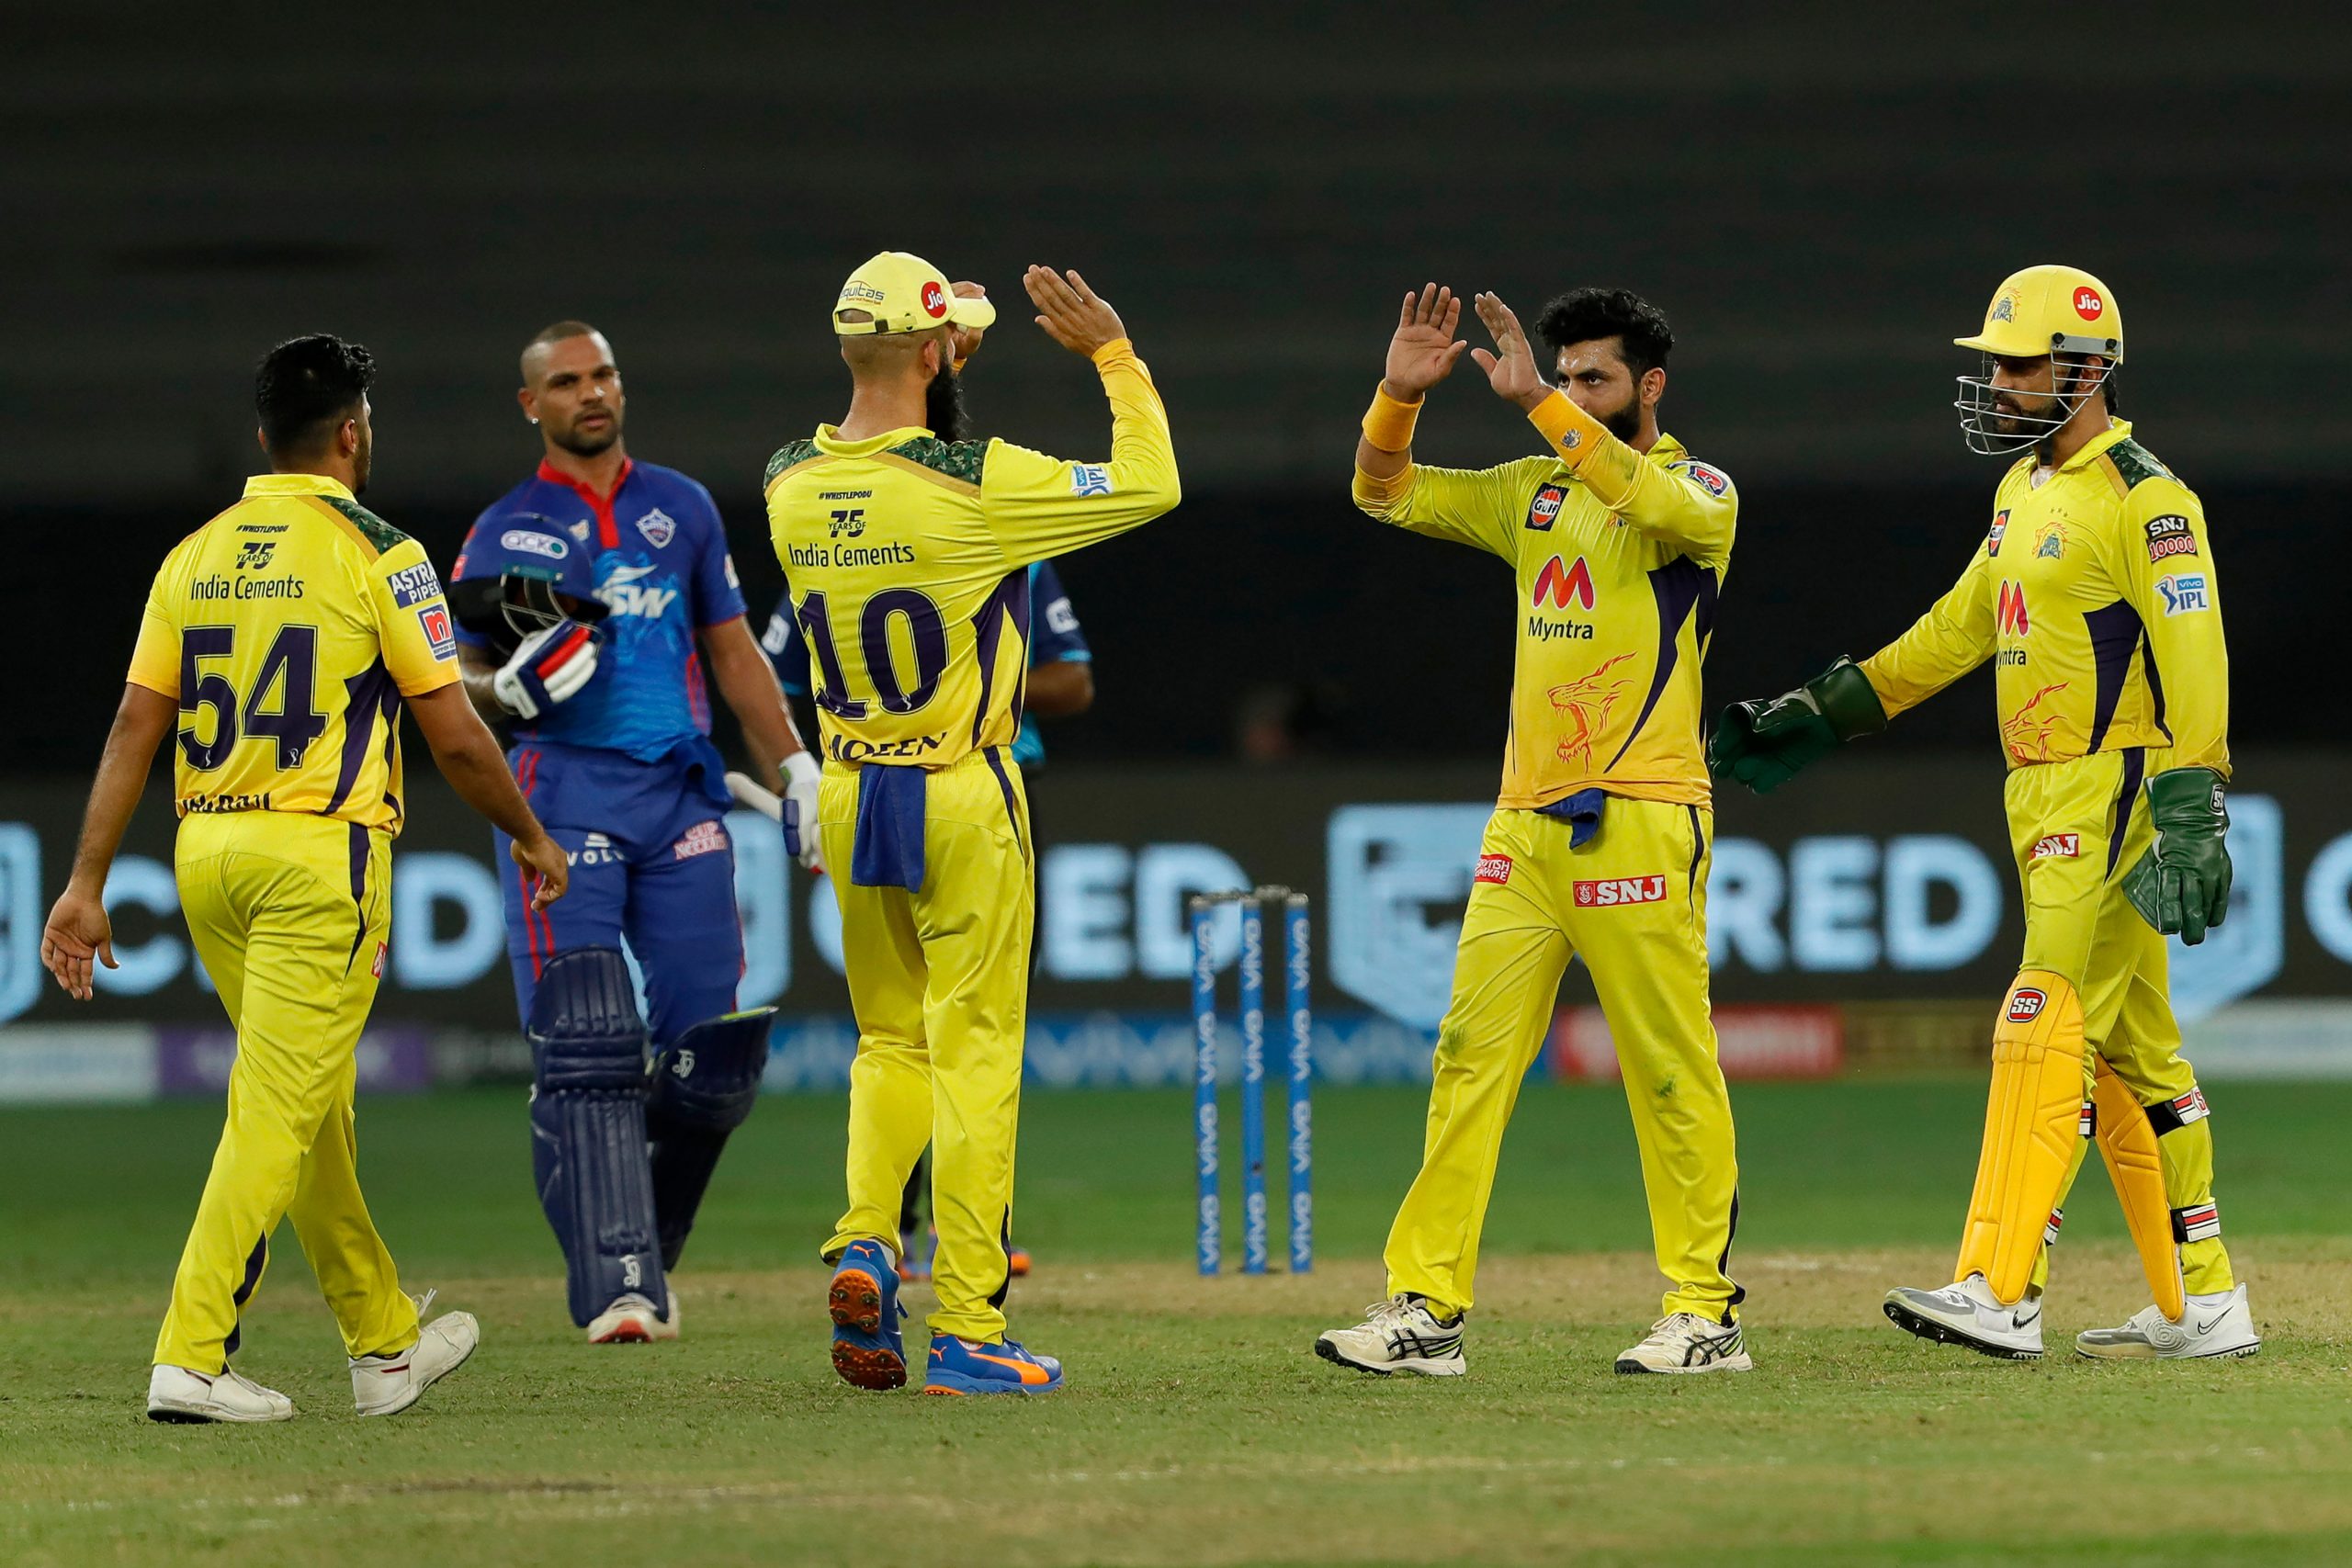 As IPL 2021 reaches its fag end, a quick look at team, players’ stats